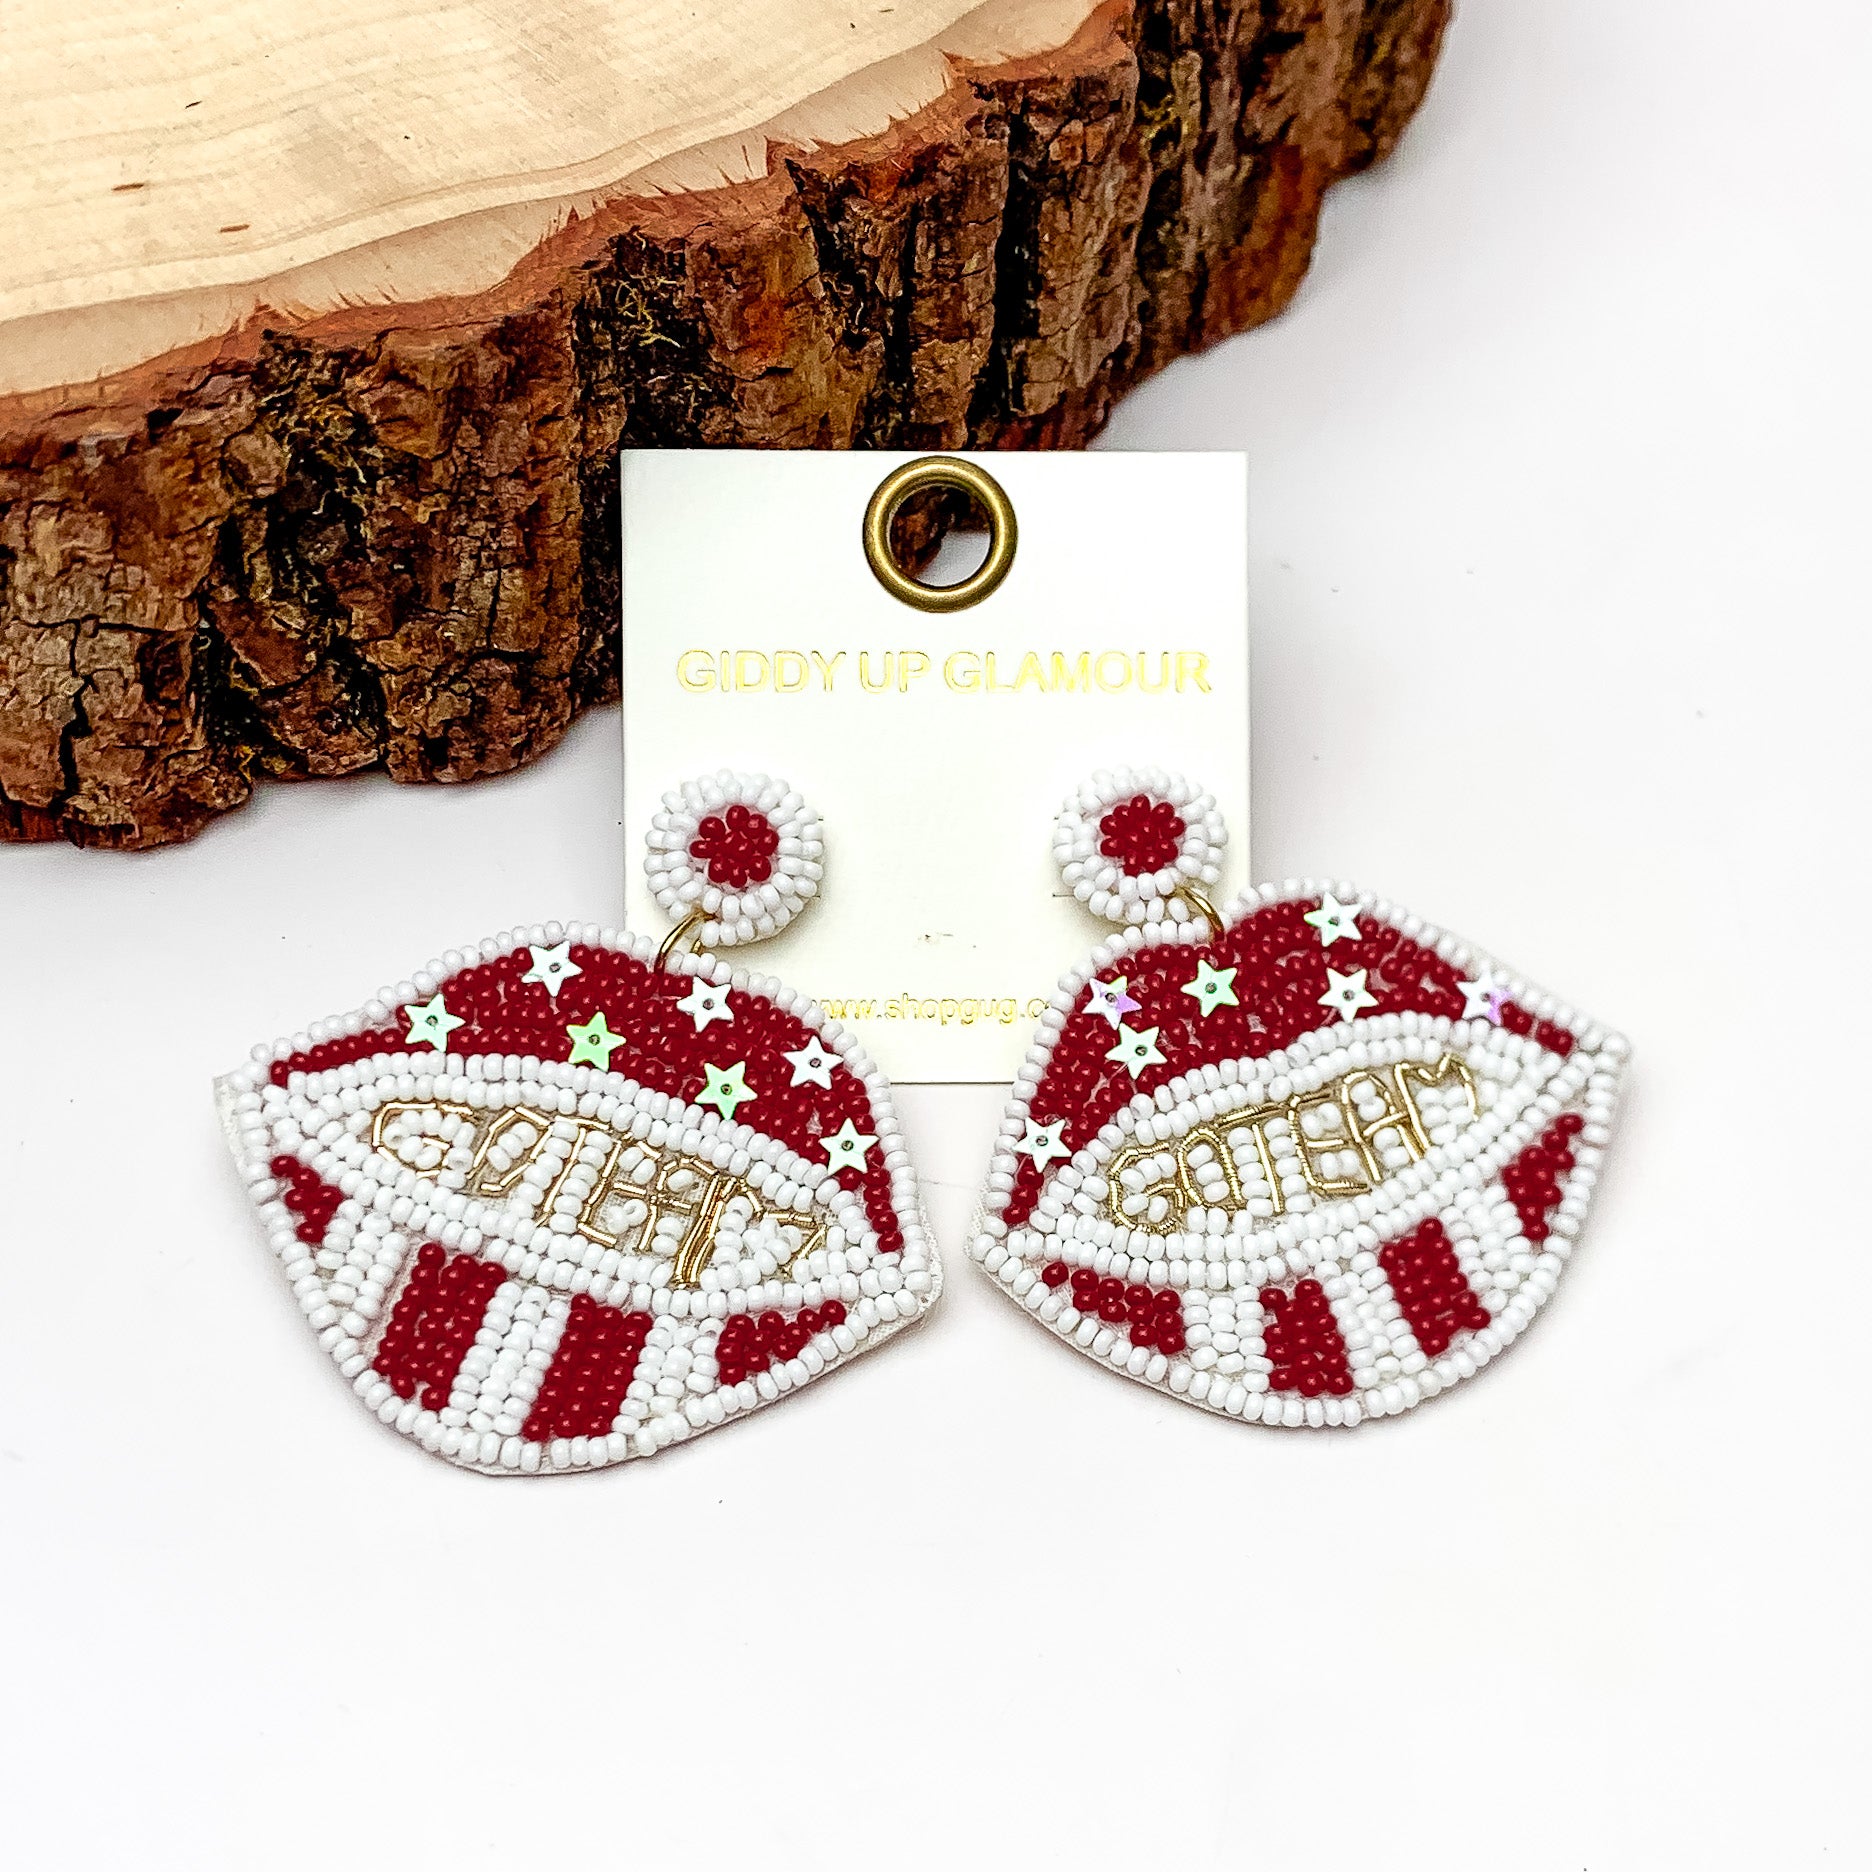 GO TEAM Beaded Lips Post Earrings in Maroon and White - Giddy Up Glamour Boutique